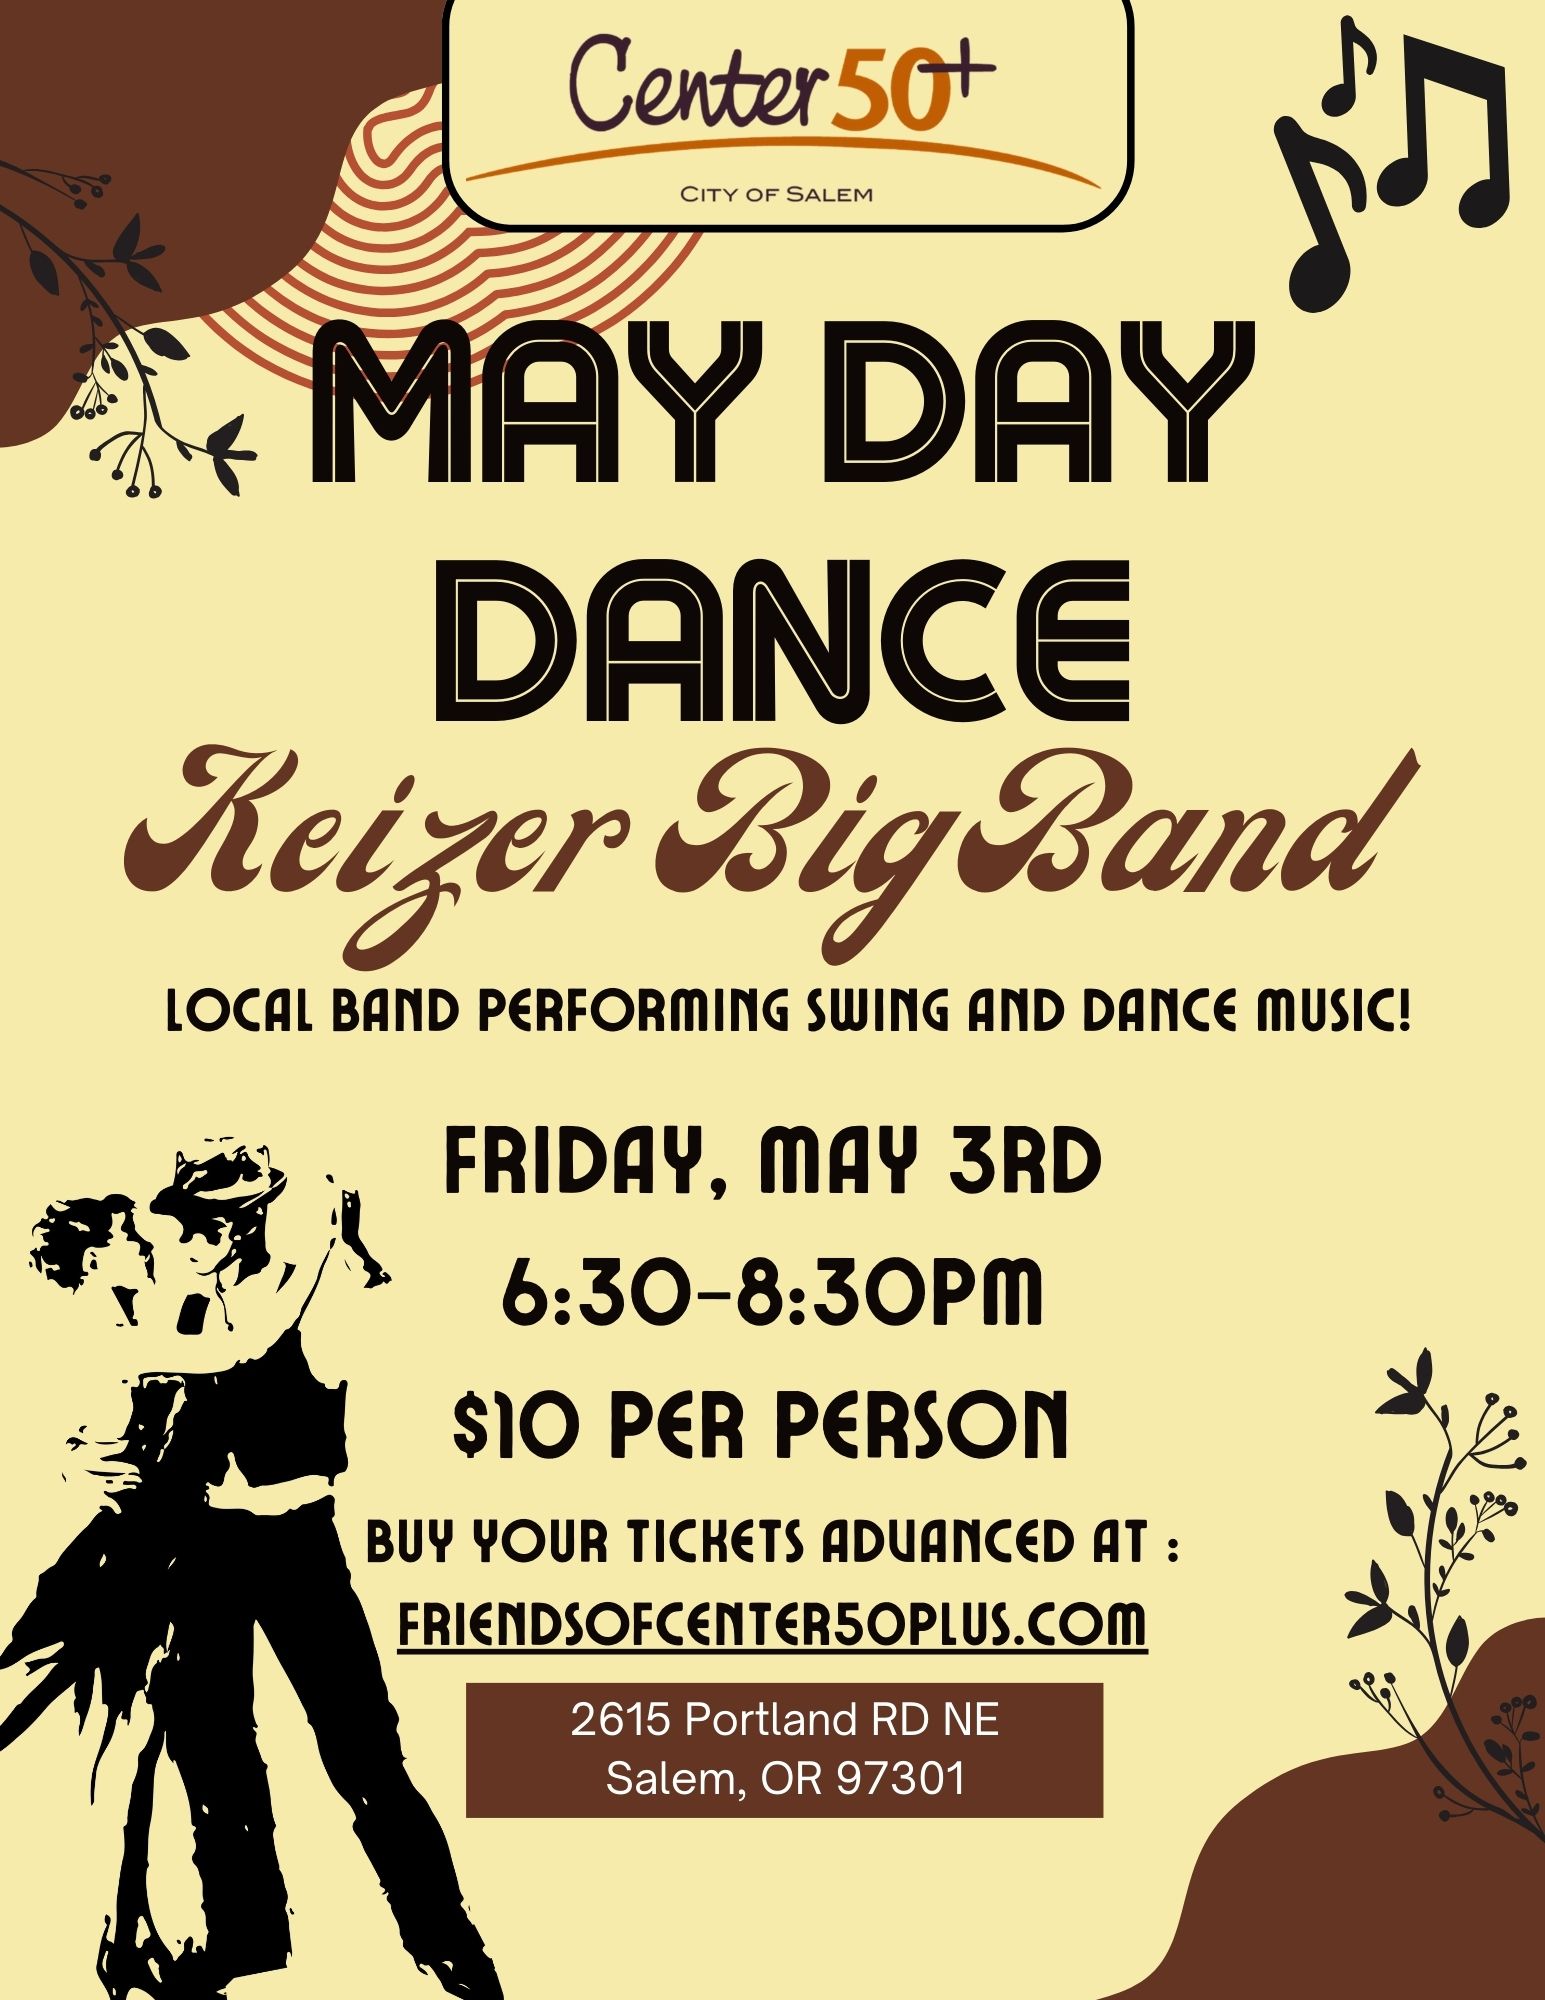 May Day Dance